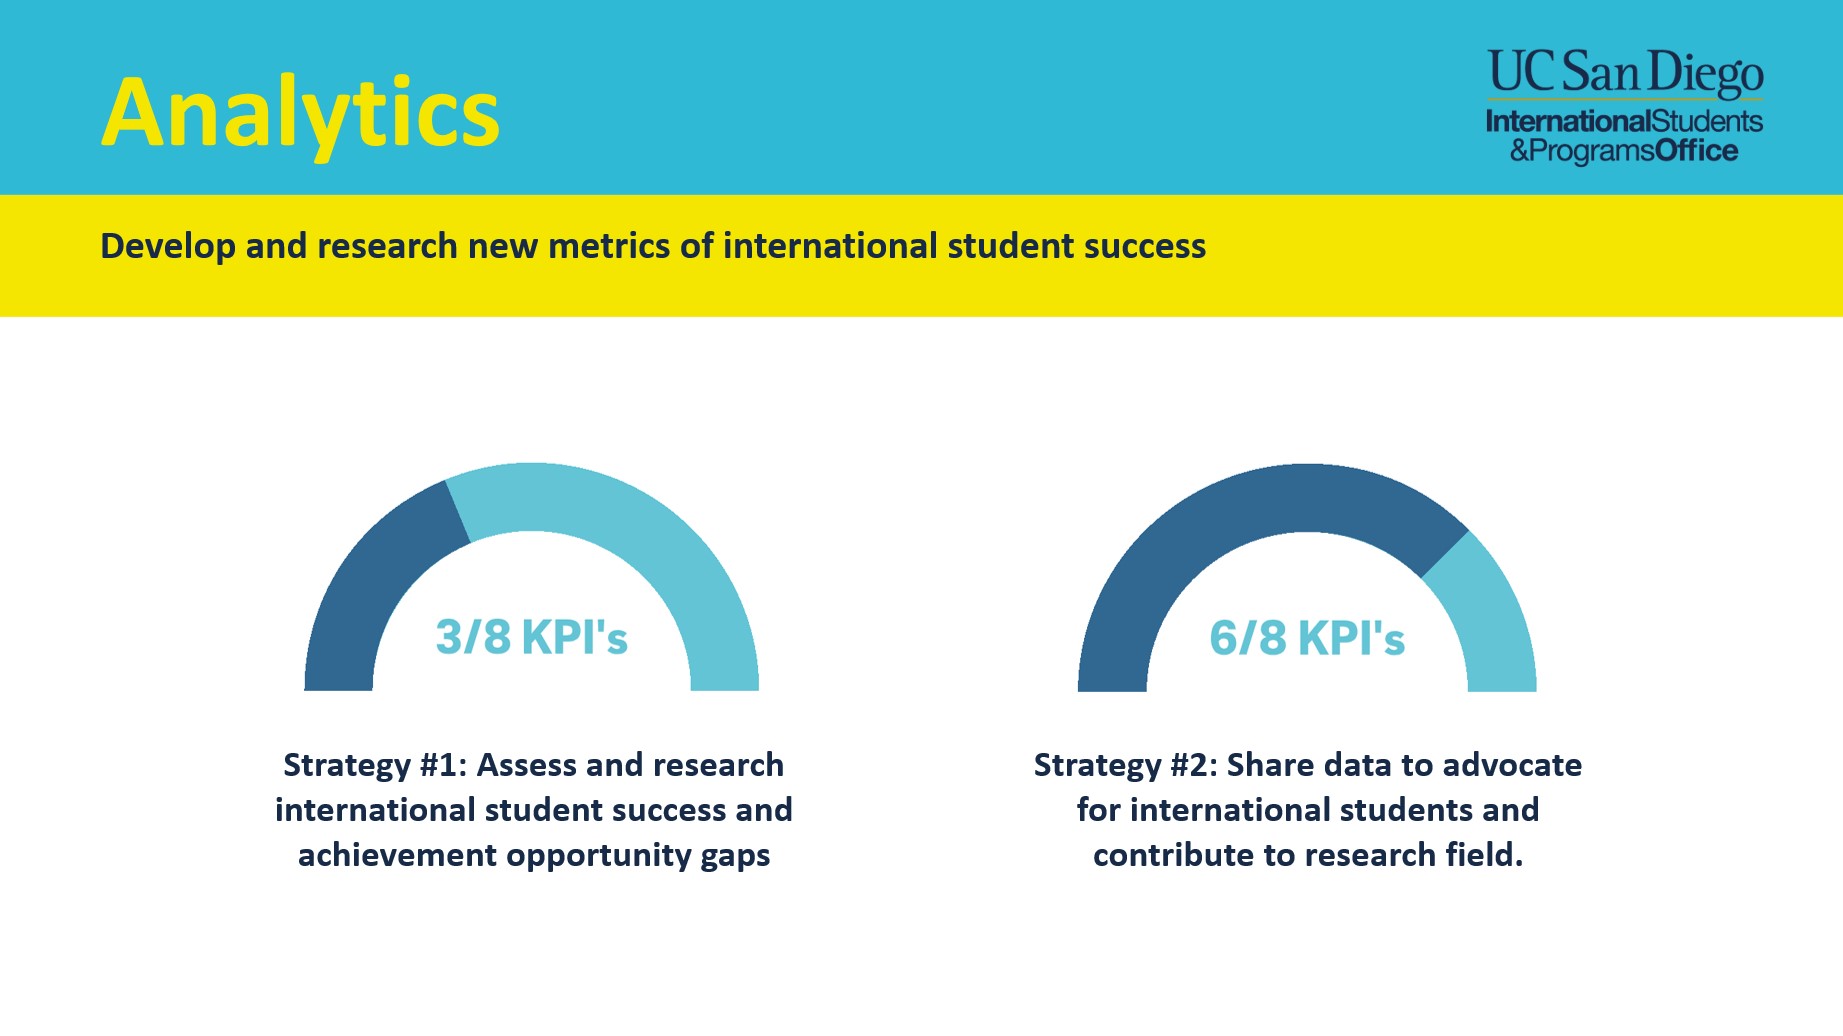 For Strategy 1, assess and research international student success and achievement opportunity gaps​, 3 out of 8 KPI’s have been completed. For Strategy 2, share data to advocate for international students and contribute to research field, 6 out of 8 KPI’s have been completed.